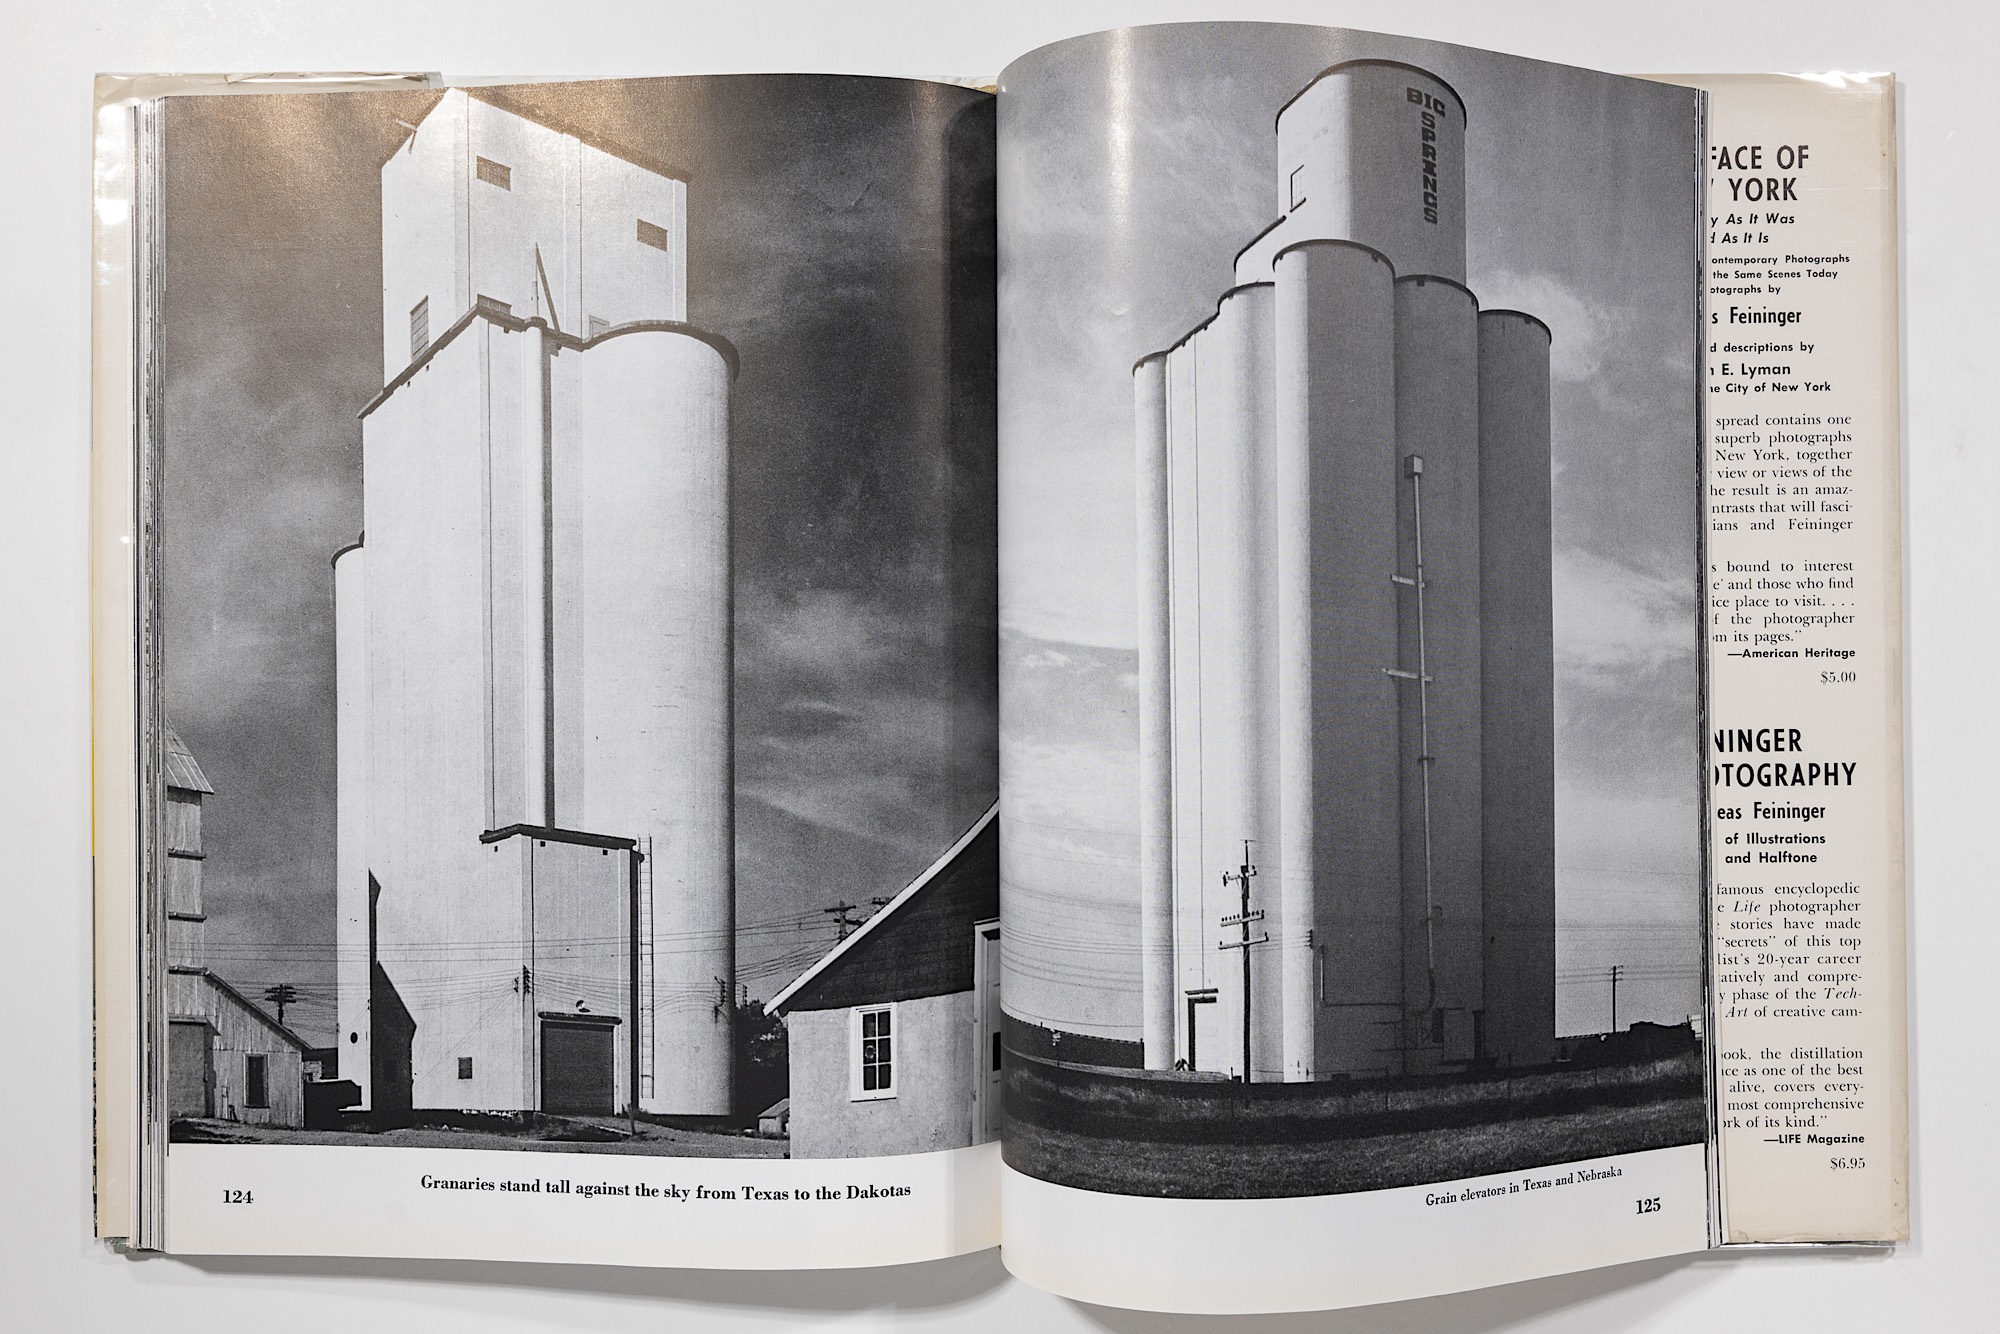 Andreas Feininger - Changing America: The Land As It Was and How Man Has Changed It Image 9